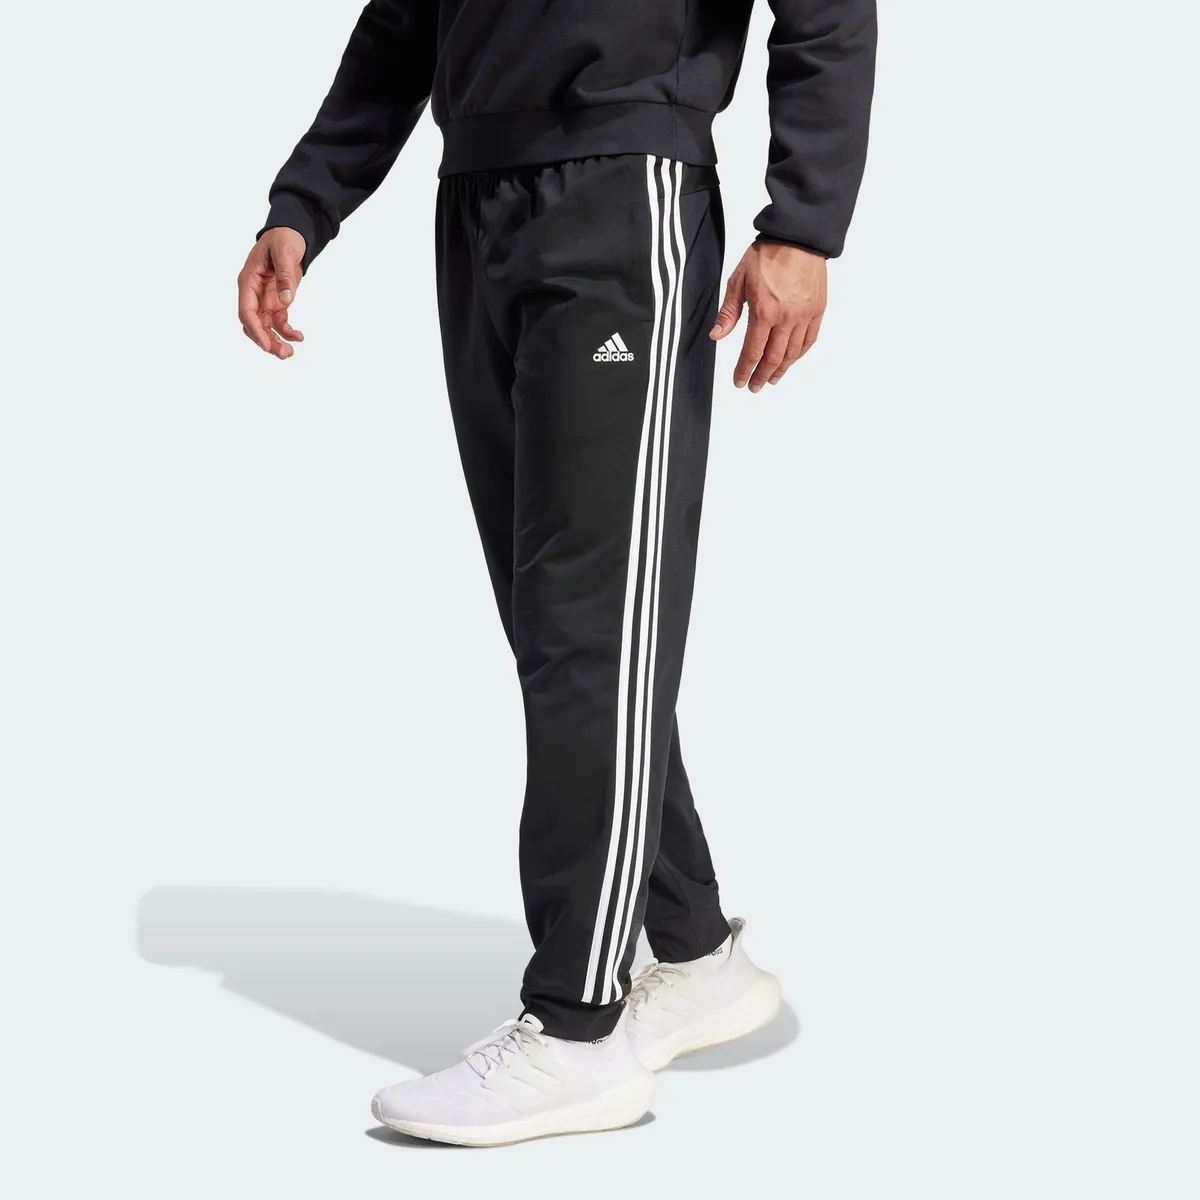 Njoeus Mens Pants Track Pants For Men Men's Summer New Style And  Fashionable Pure Cotton And Linen Trousers Mens Sweatpants On Clearance -  Walmart.com